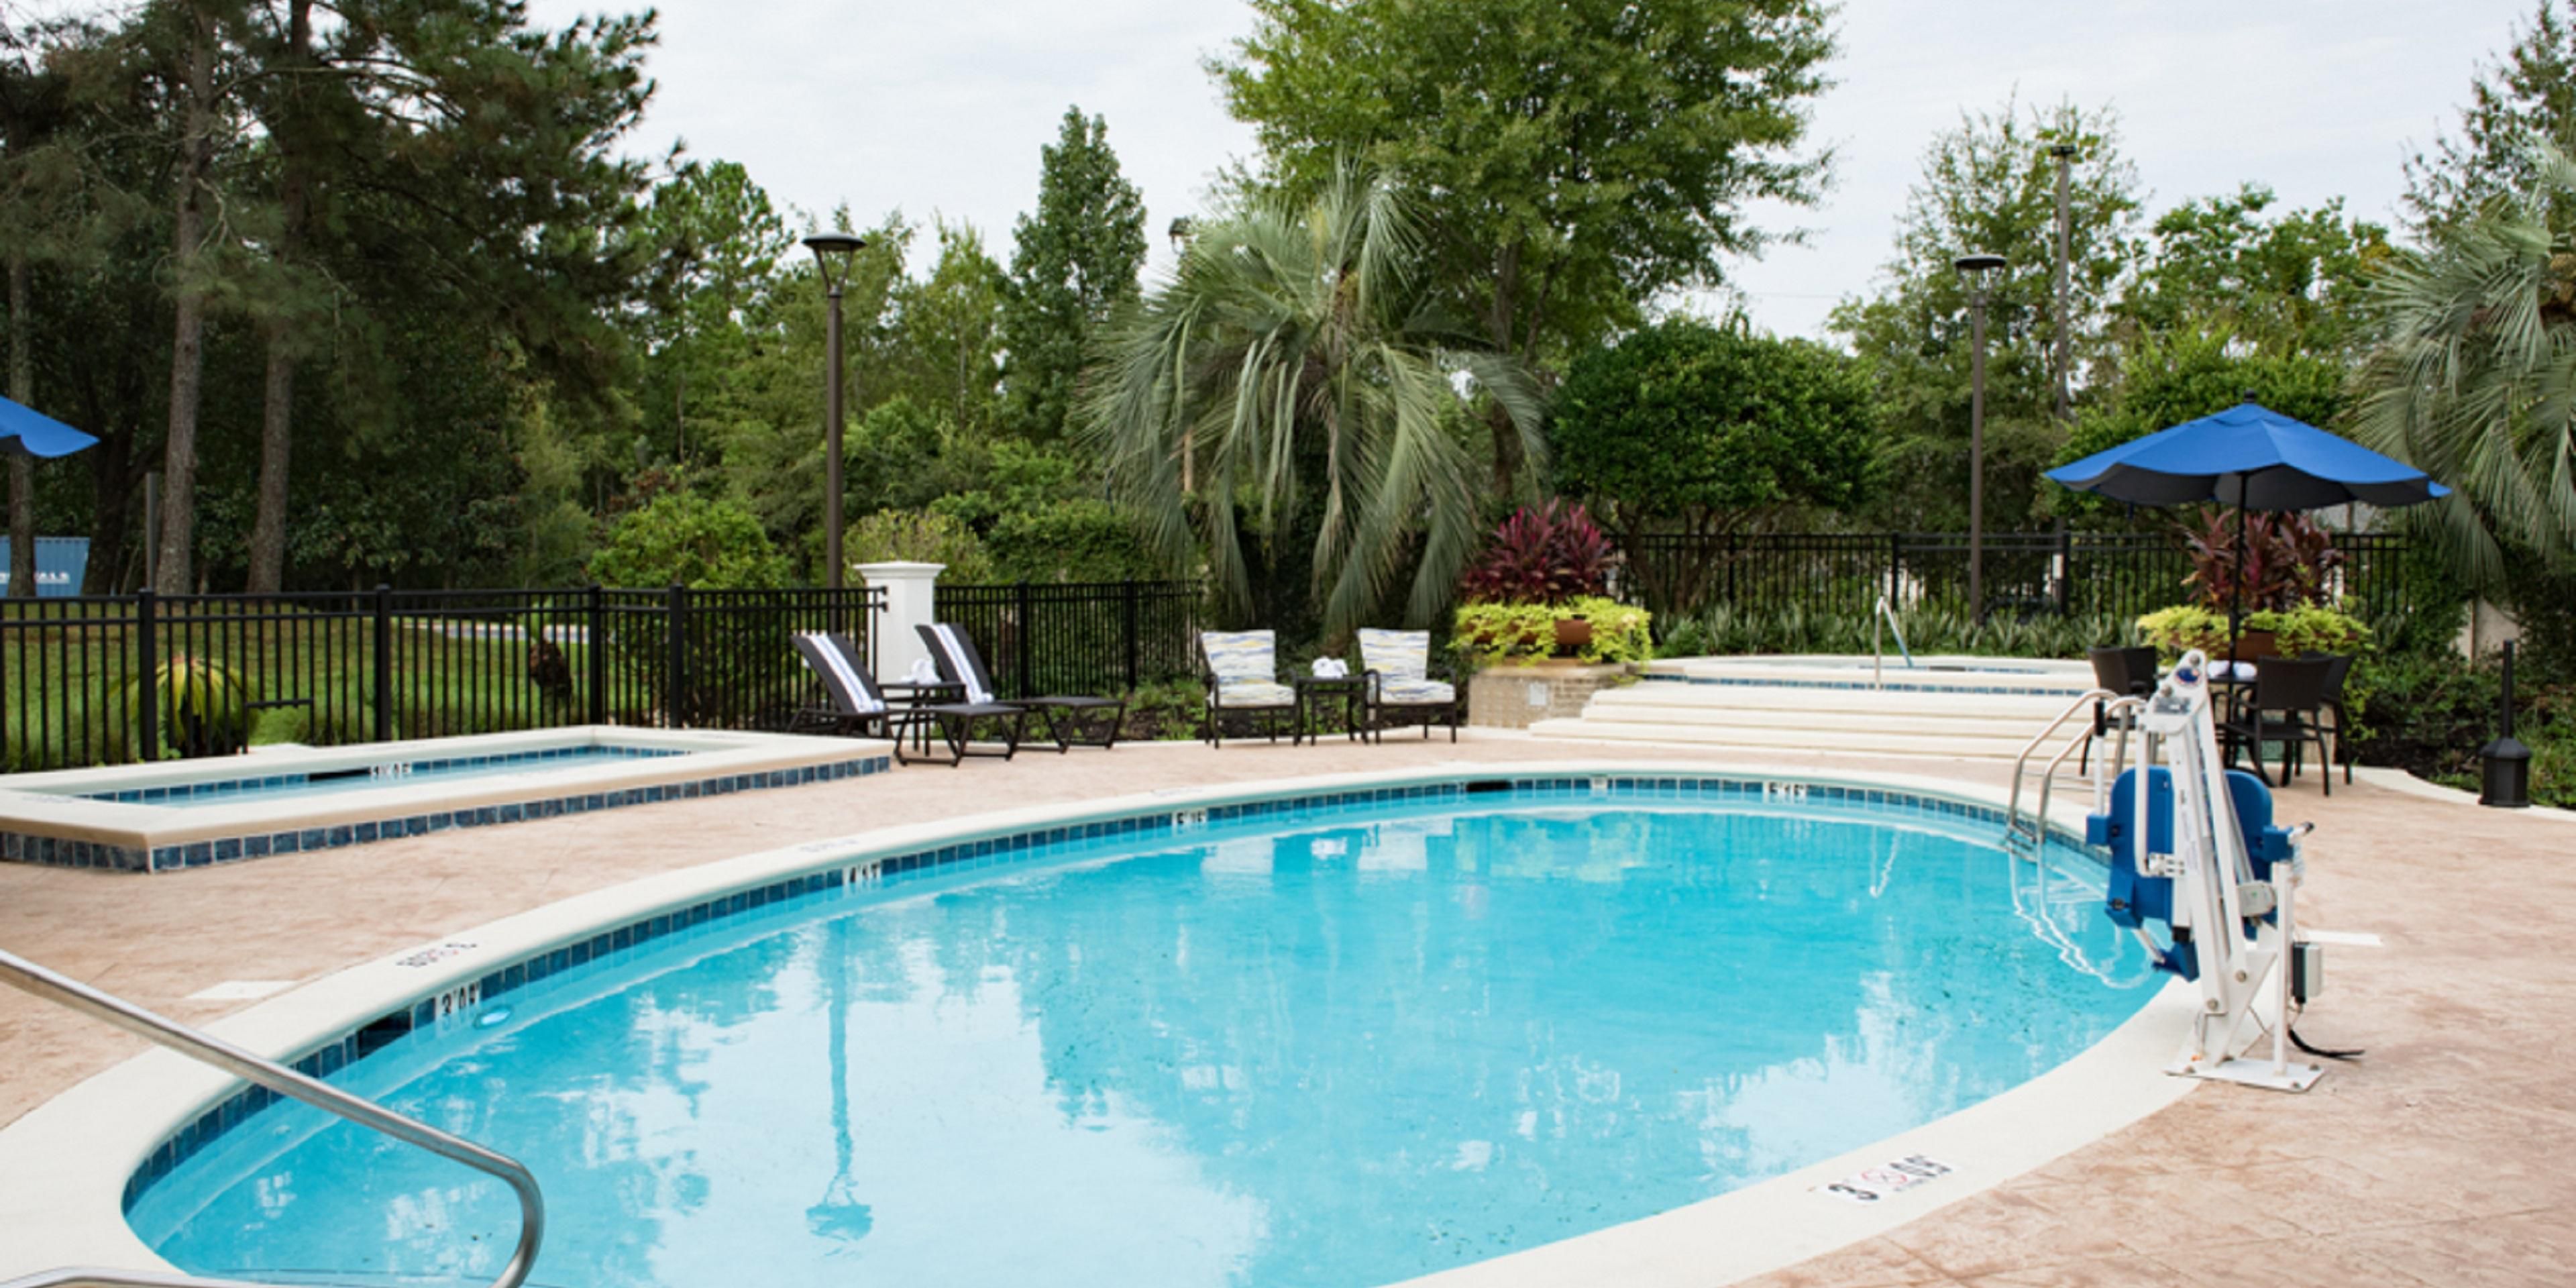 Our Tropical Courtyard features Giant Hot Tub, Kiddie Pool and Family pool.
